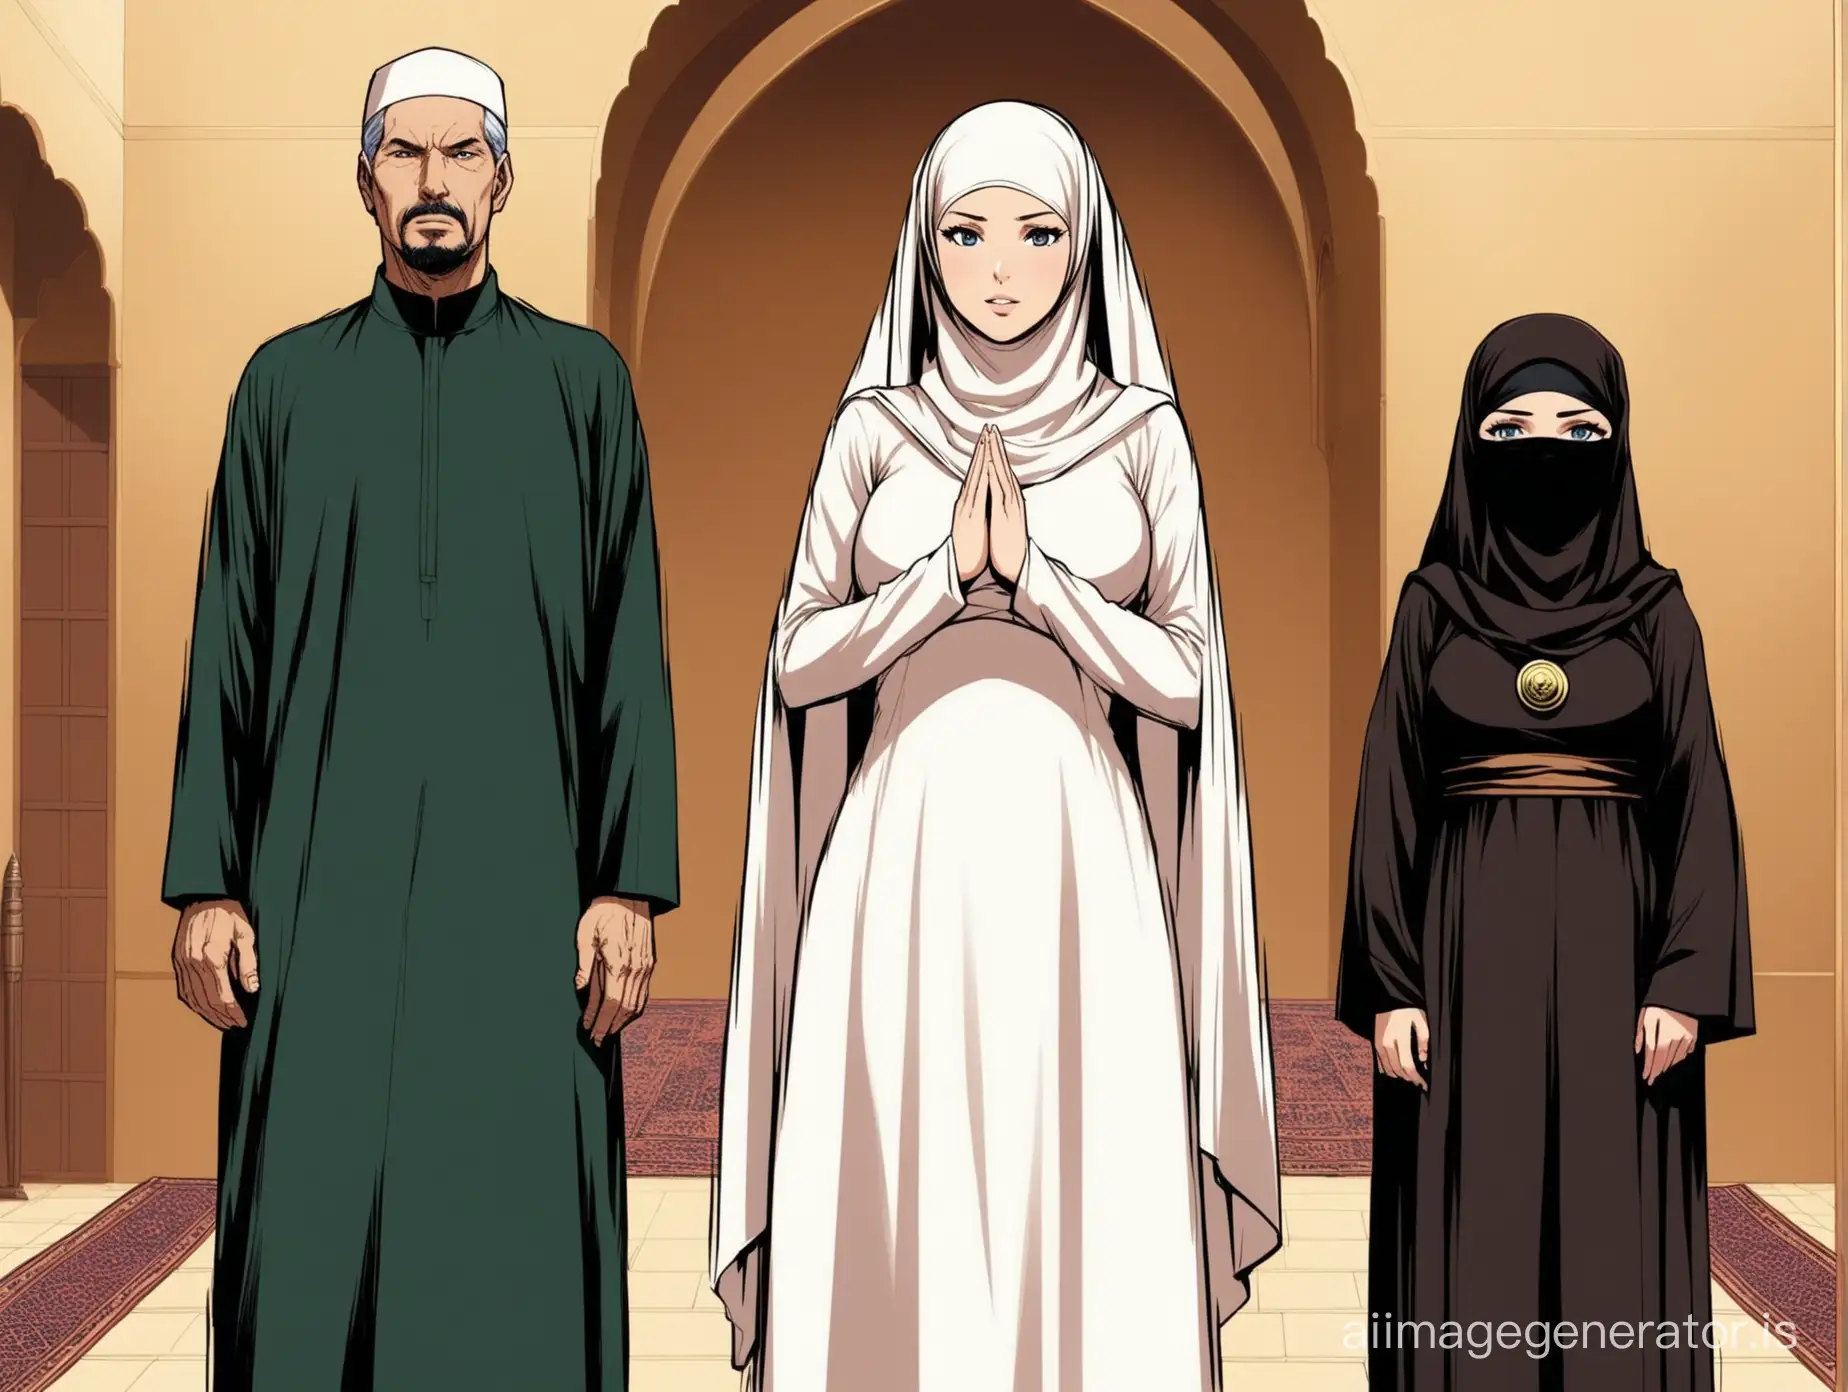 


Susans Storm from the fantastic four , taken away by an old muslim religious fanatic man , who decide to hypnotized Susan to turn her into Jamilah  his loyal faithful muslim wife . She is dressed into a floor-length flowing jilbab with hijab and niqab , standing demurely beside her new husband and master
